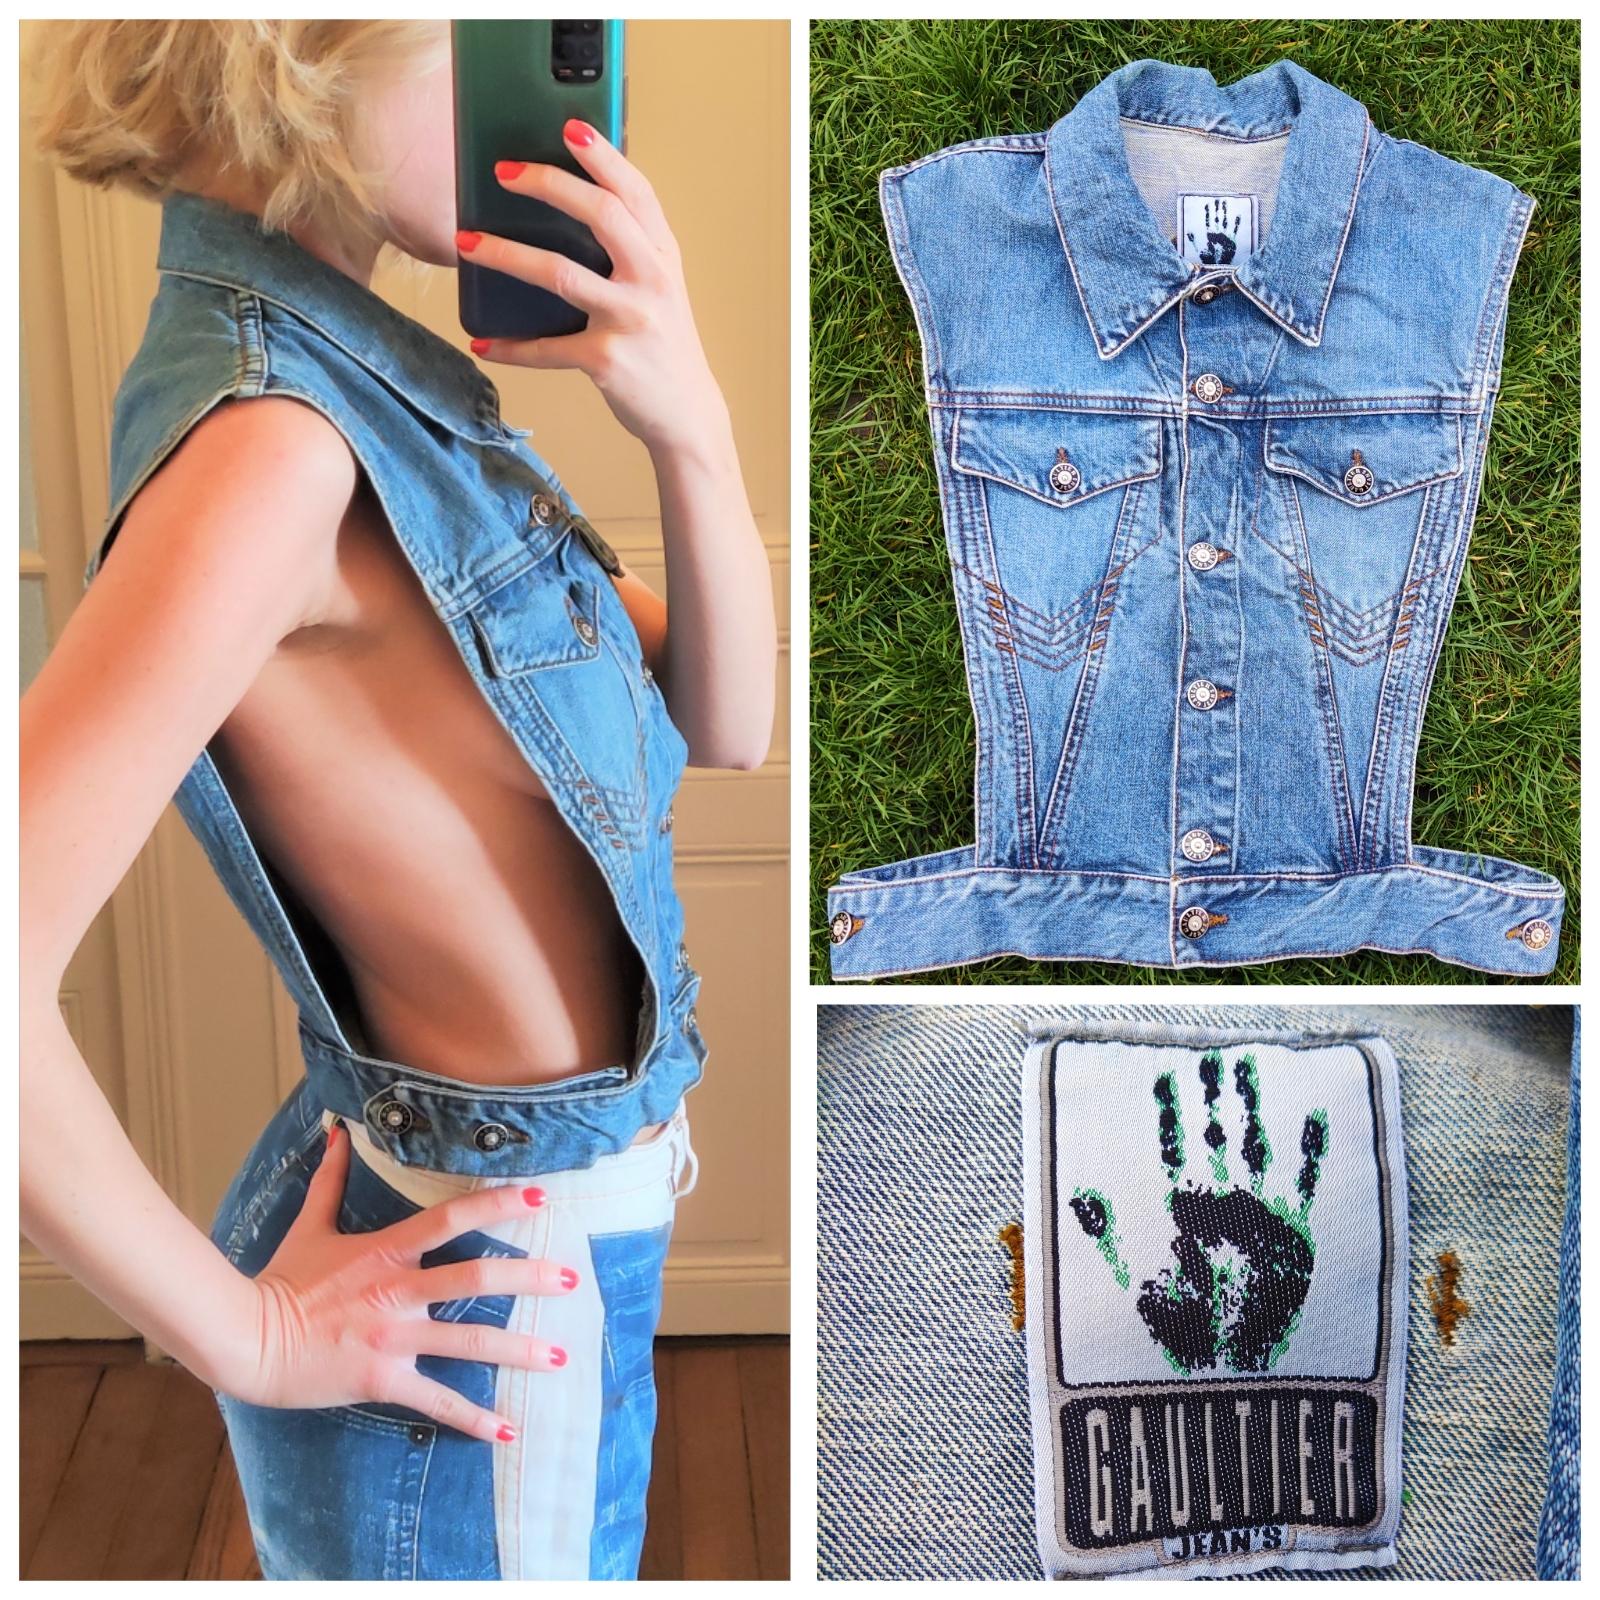 Features:
- 100% Authentic JEAN PAUL GAULTIER.
- Denim vest with open sided feature.
- Adjustable waist band and 2 breast pockets.
- Button down closure.
- Metal GAULTIER JEAN'S PARIS enamel plaque at the back.
- GAULTIER JEAN`S buttons.
-